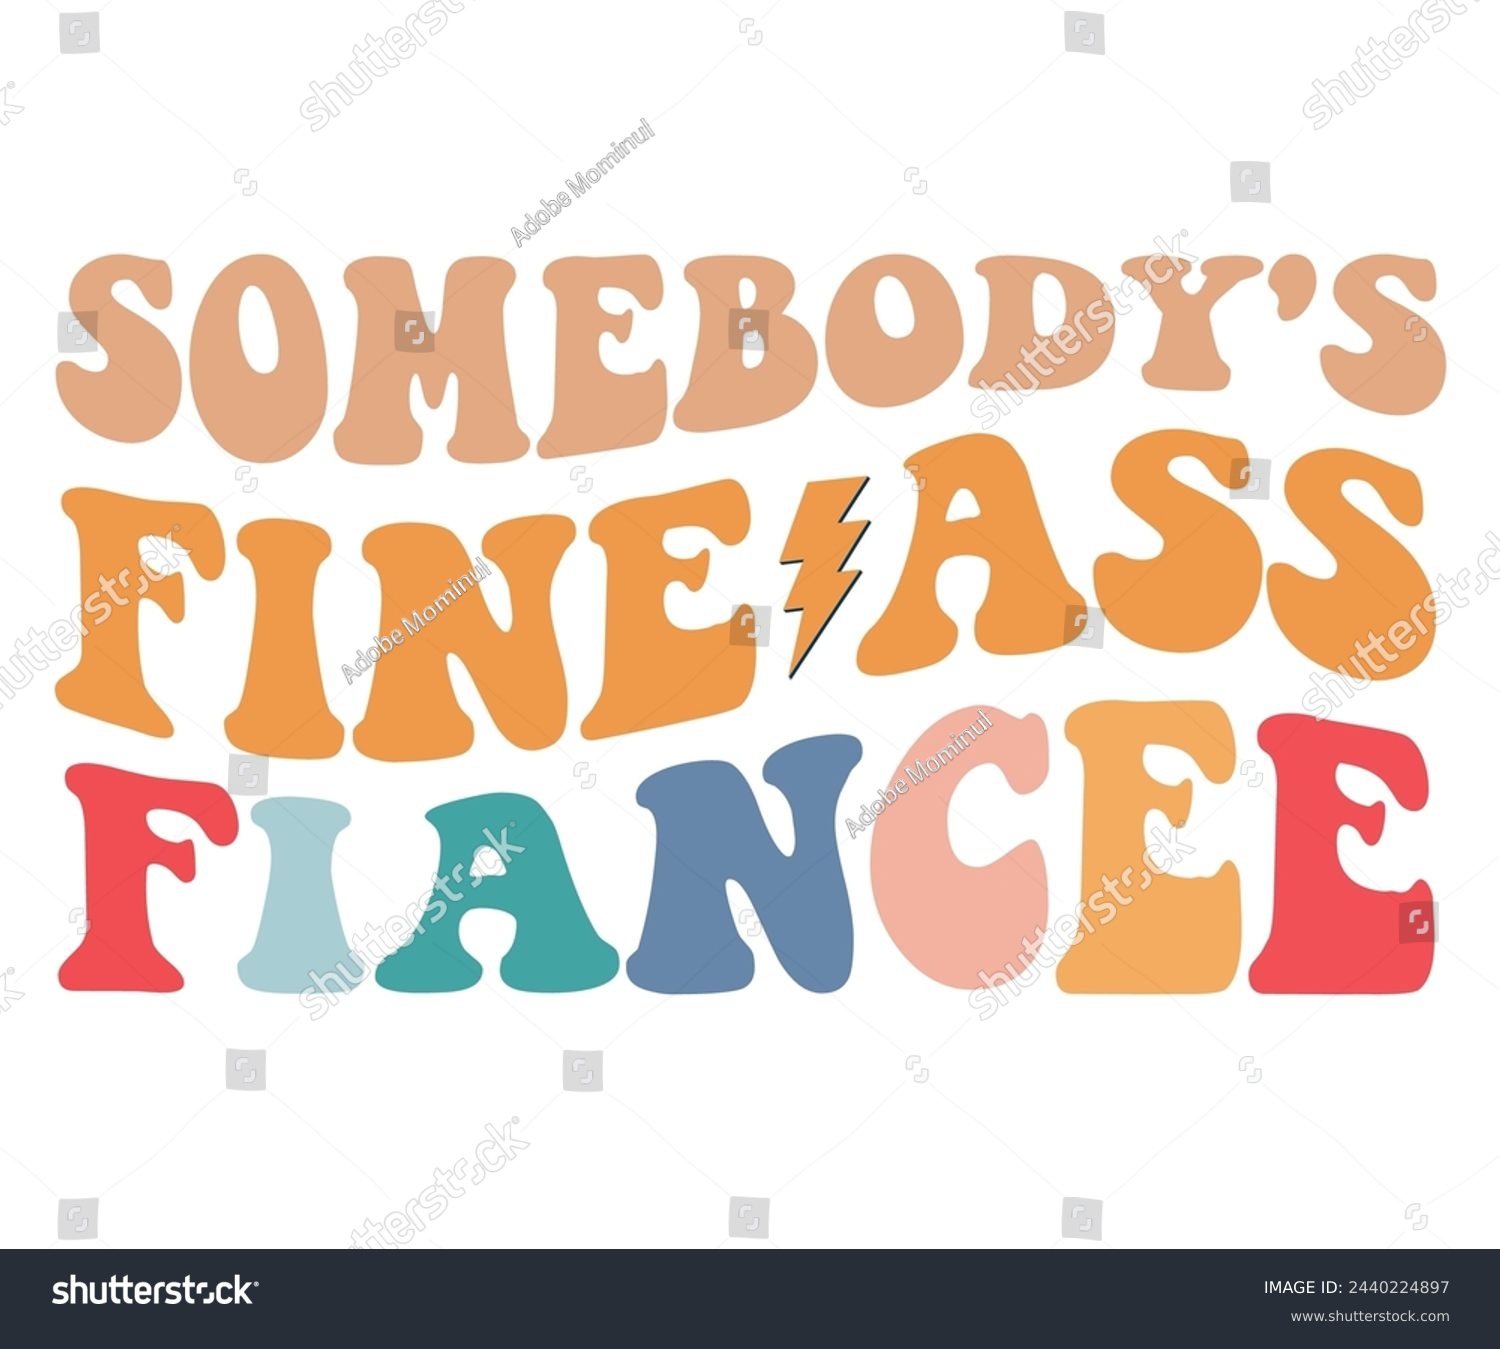 SVG of Somebody's Fine Ass Fiancee,Retro Groovy,Svg,T-shirt,Typography,Svg Cut File,Commercial Use,Instant Download  svg